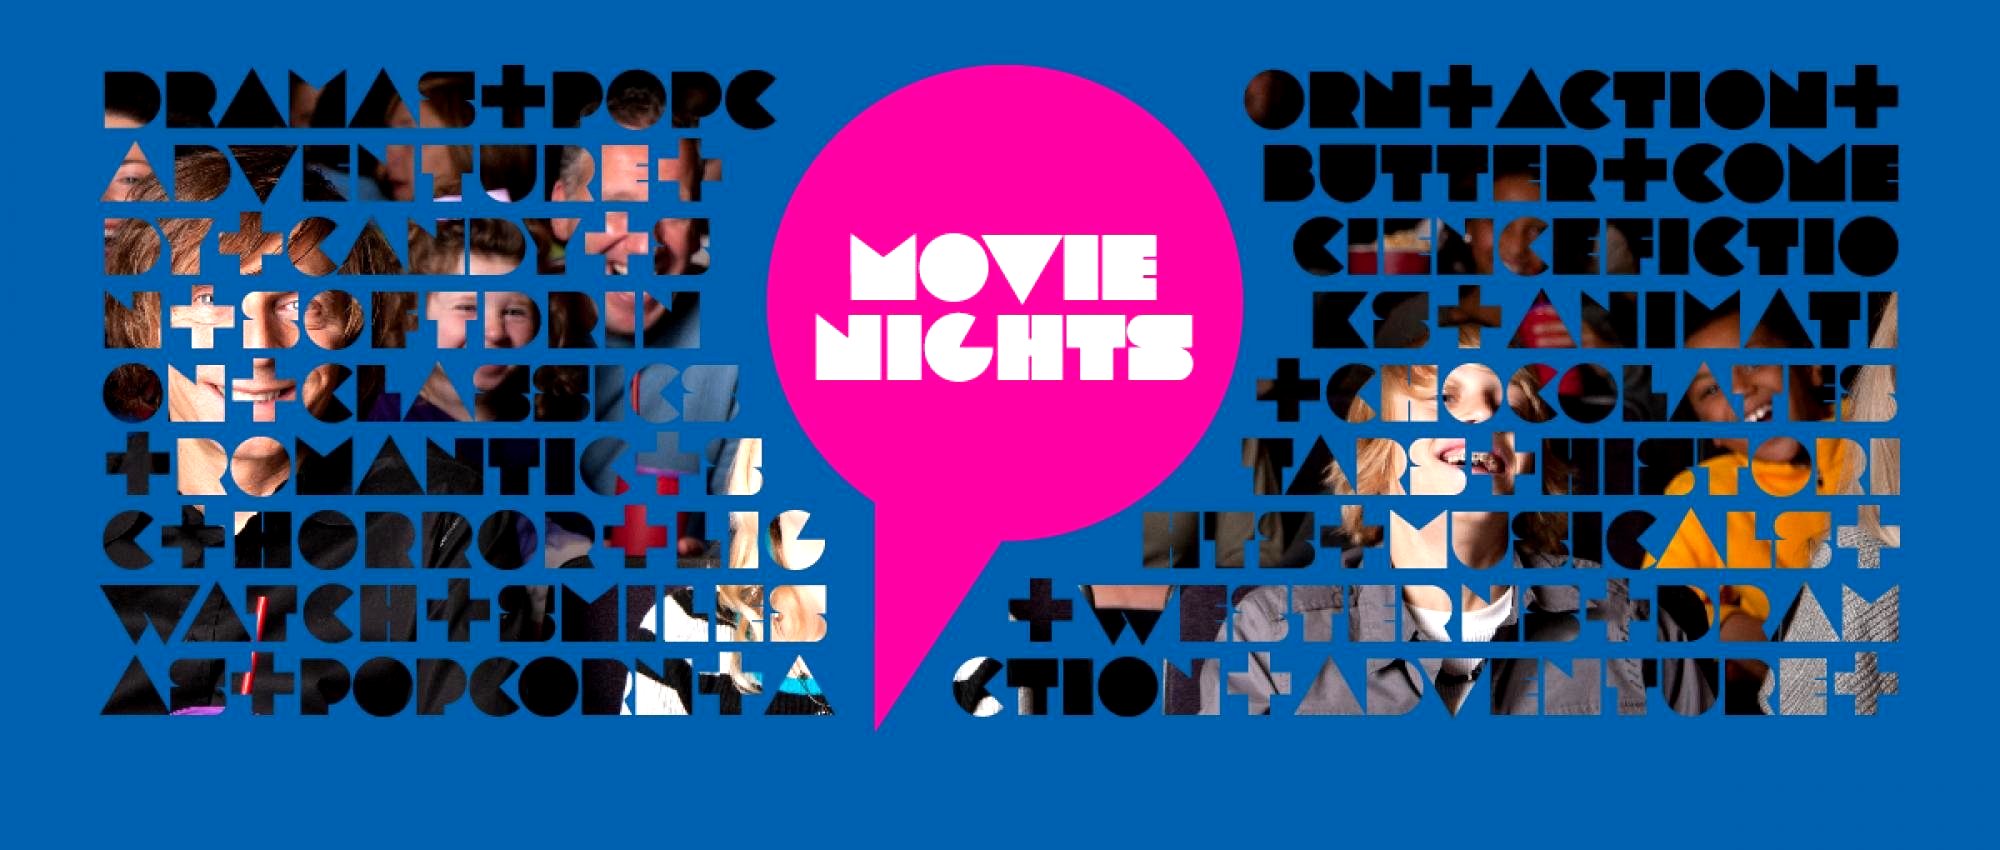 Movie Nights 2016 Google image from https://culture.mississauga.ca/event/celebration-square/movie-nights